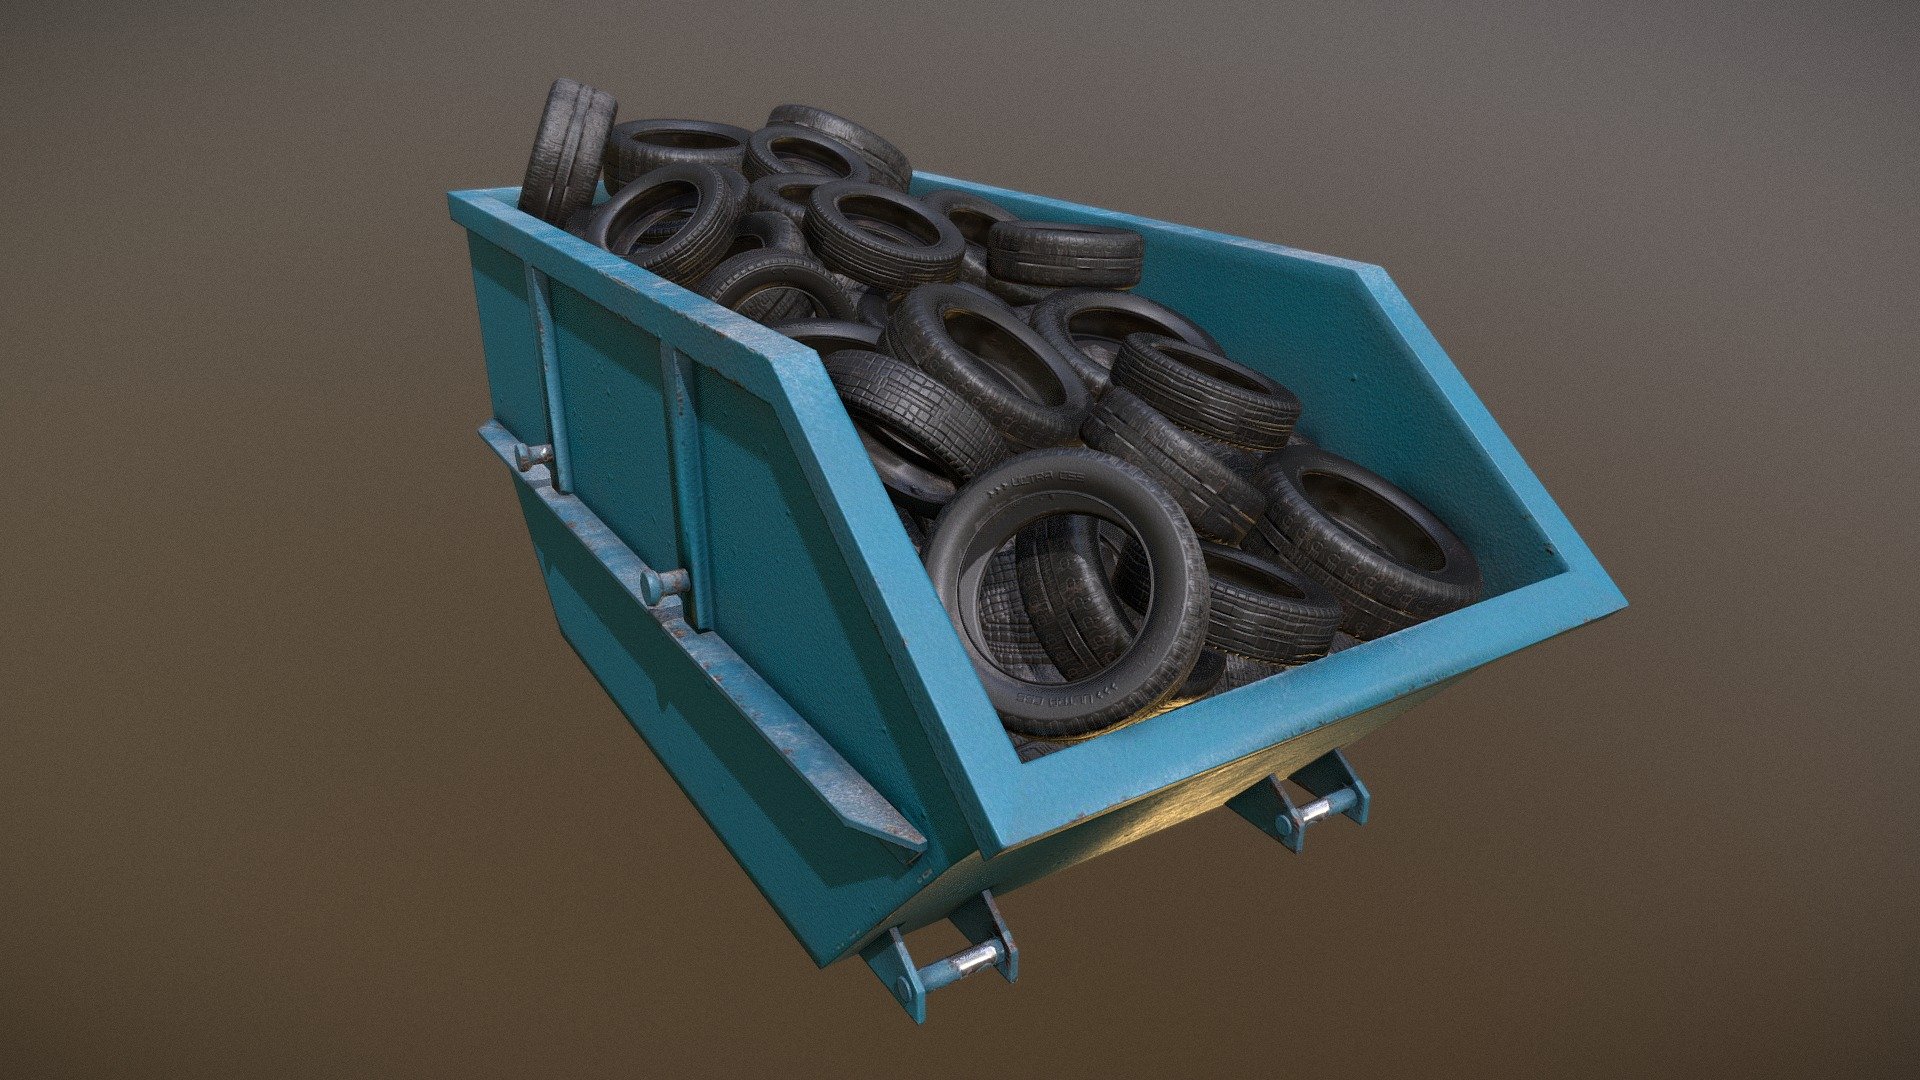 Made in blnder Textured in Substance painter:

Tries: 41 k 
Text: 2048 - Container with Tires - 3D model by Positivity 3d model